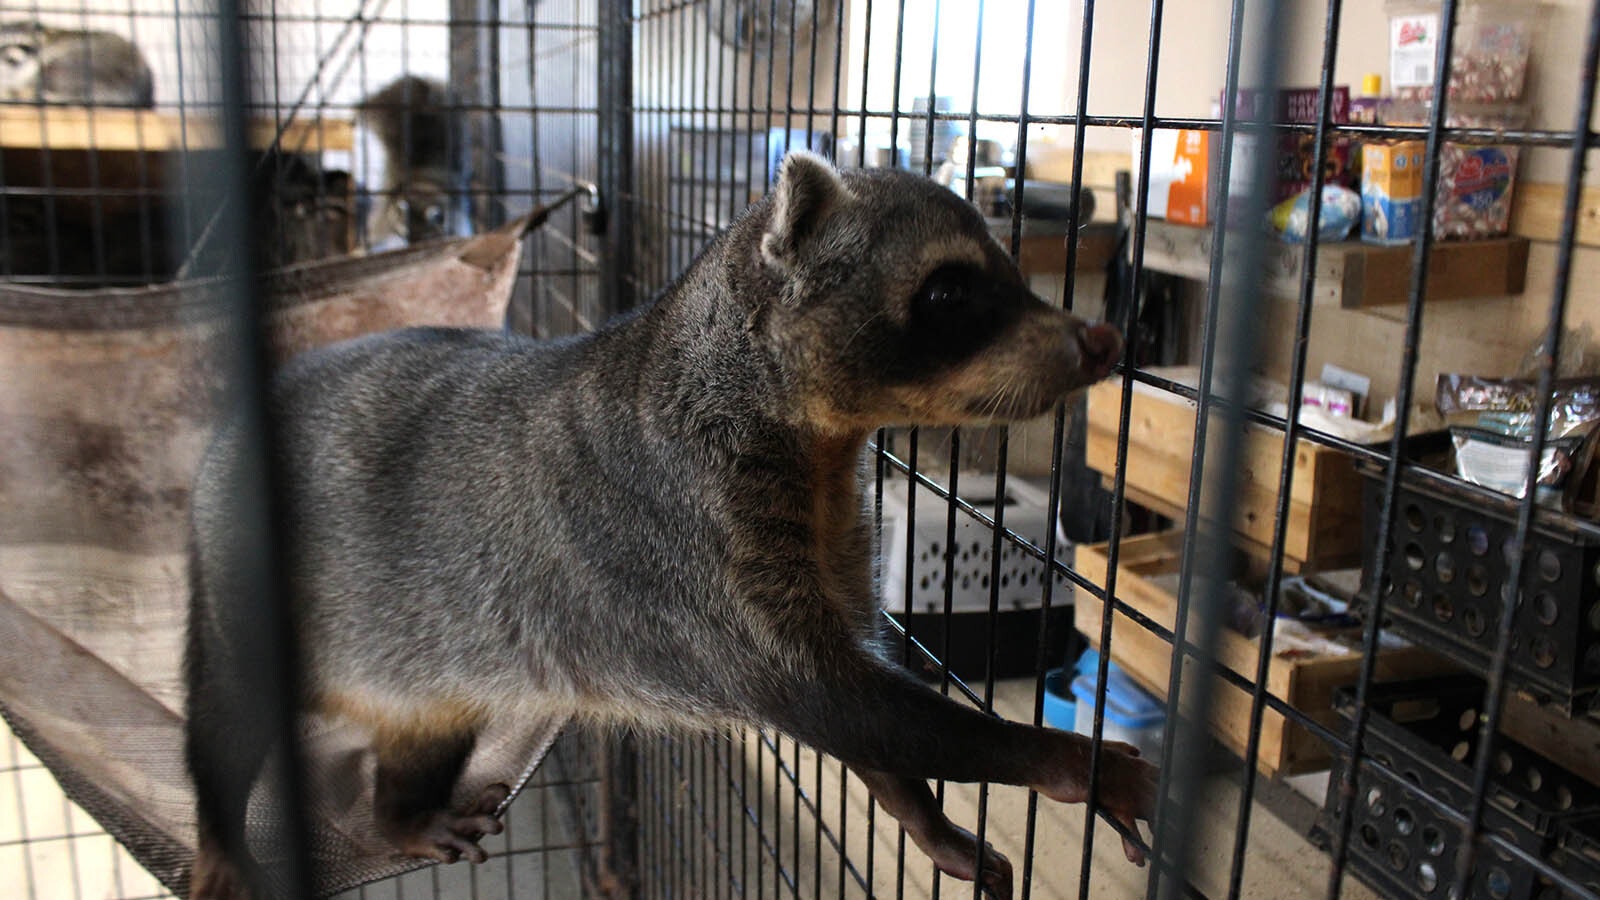 Mickey, a South American crab-eating raccoon, lives at the Broken Bandit Wildlife Center east of Cheyenne.